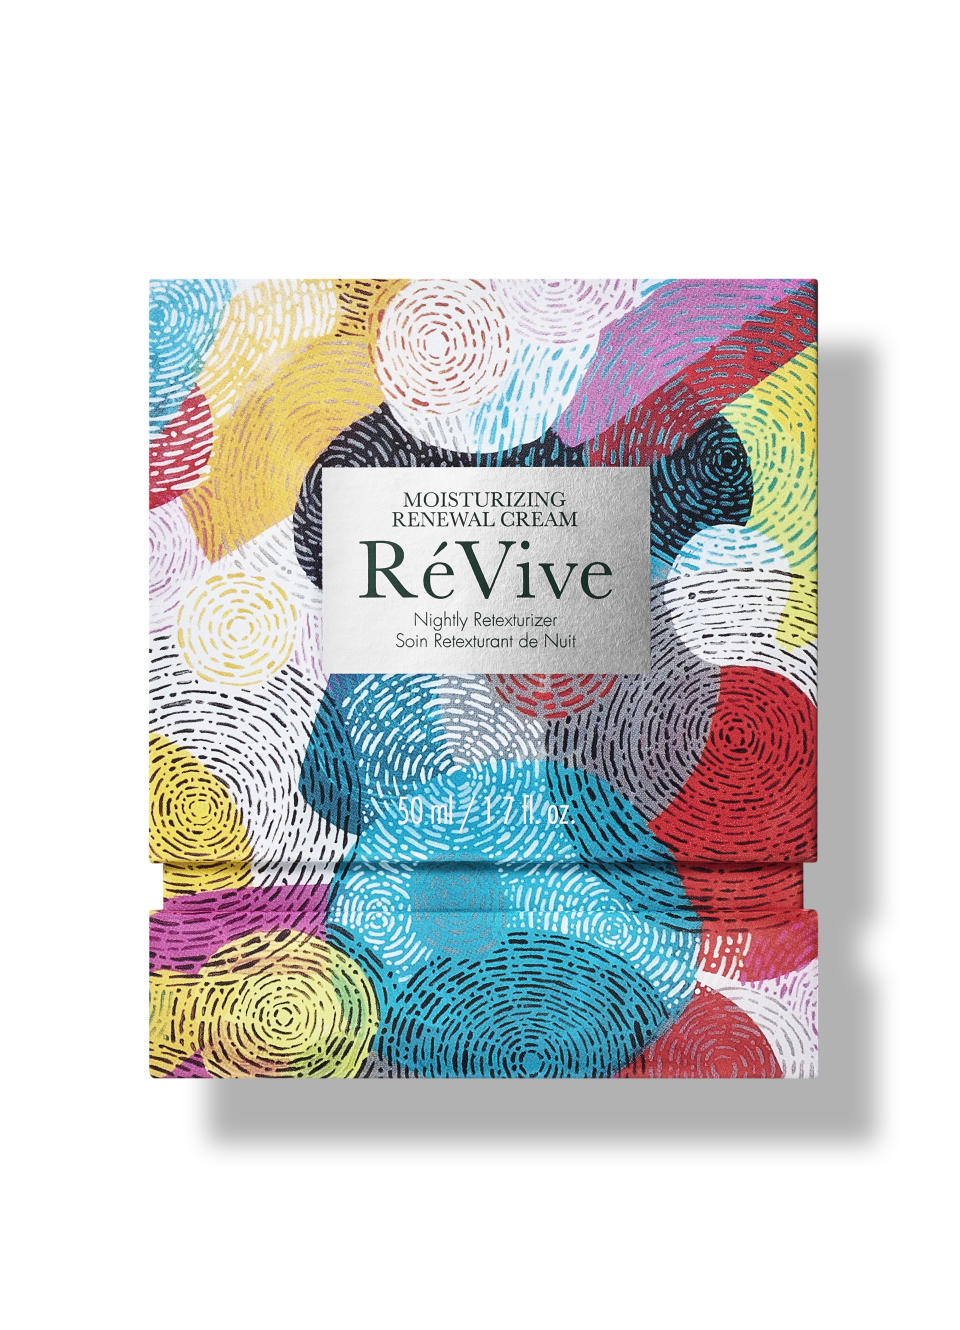 RéVive has partnered with well-known artists for limited-edition products since its inception.